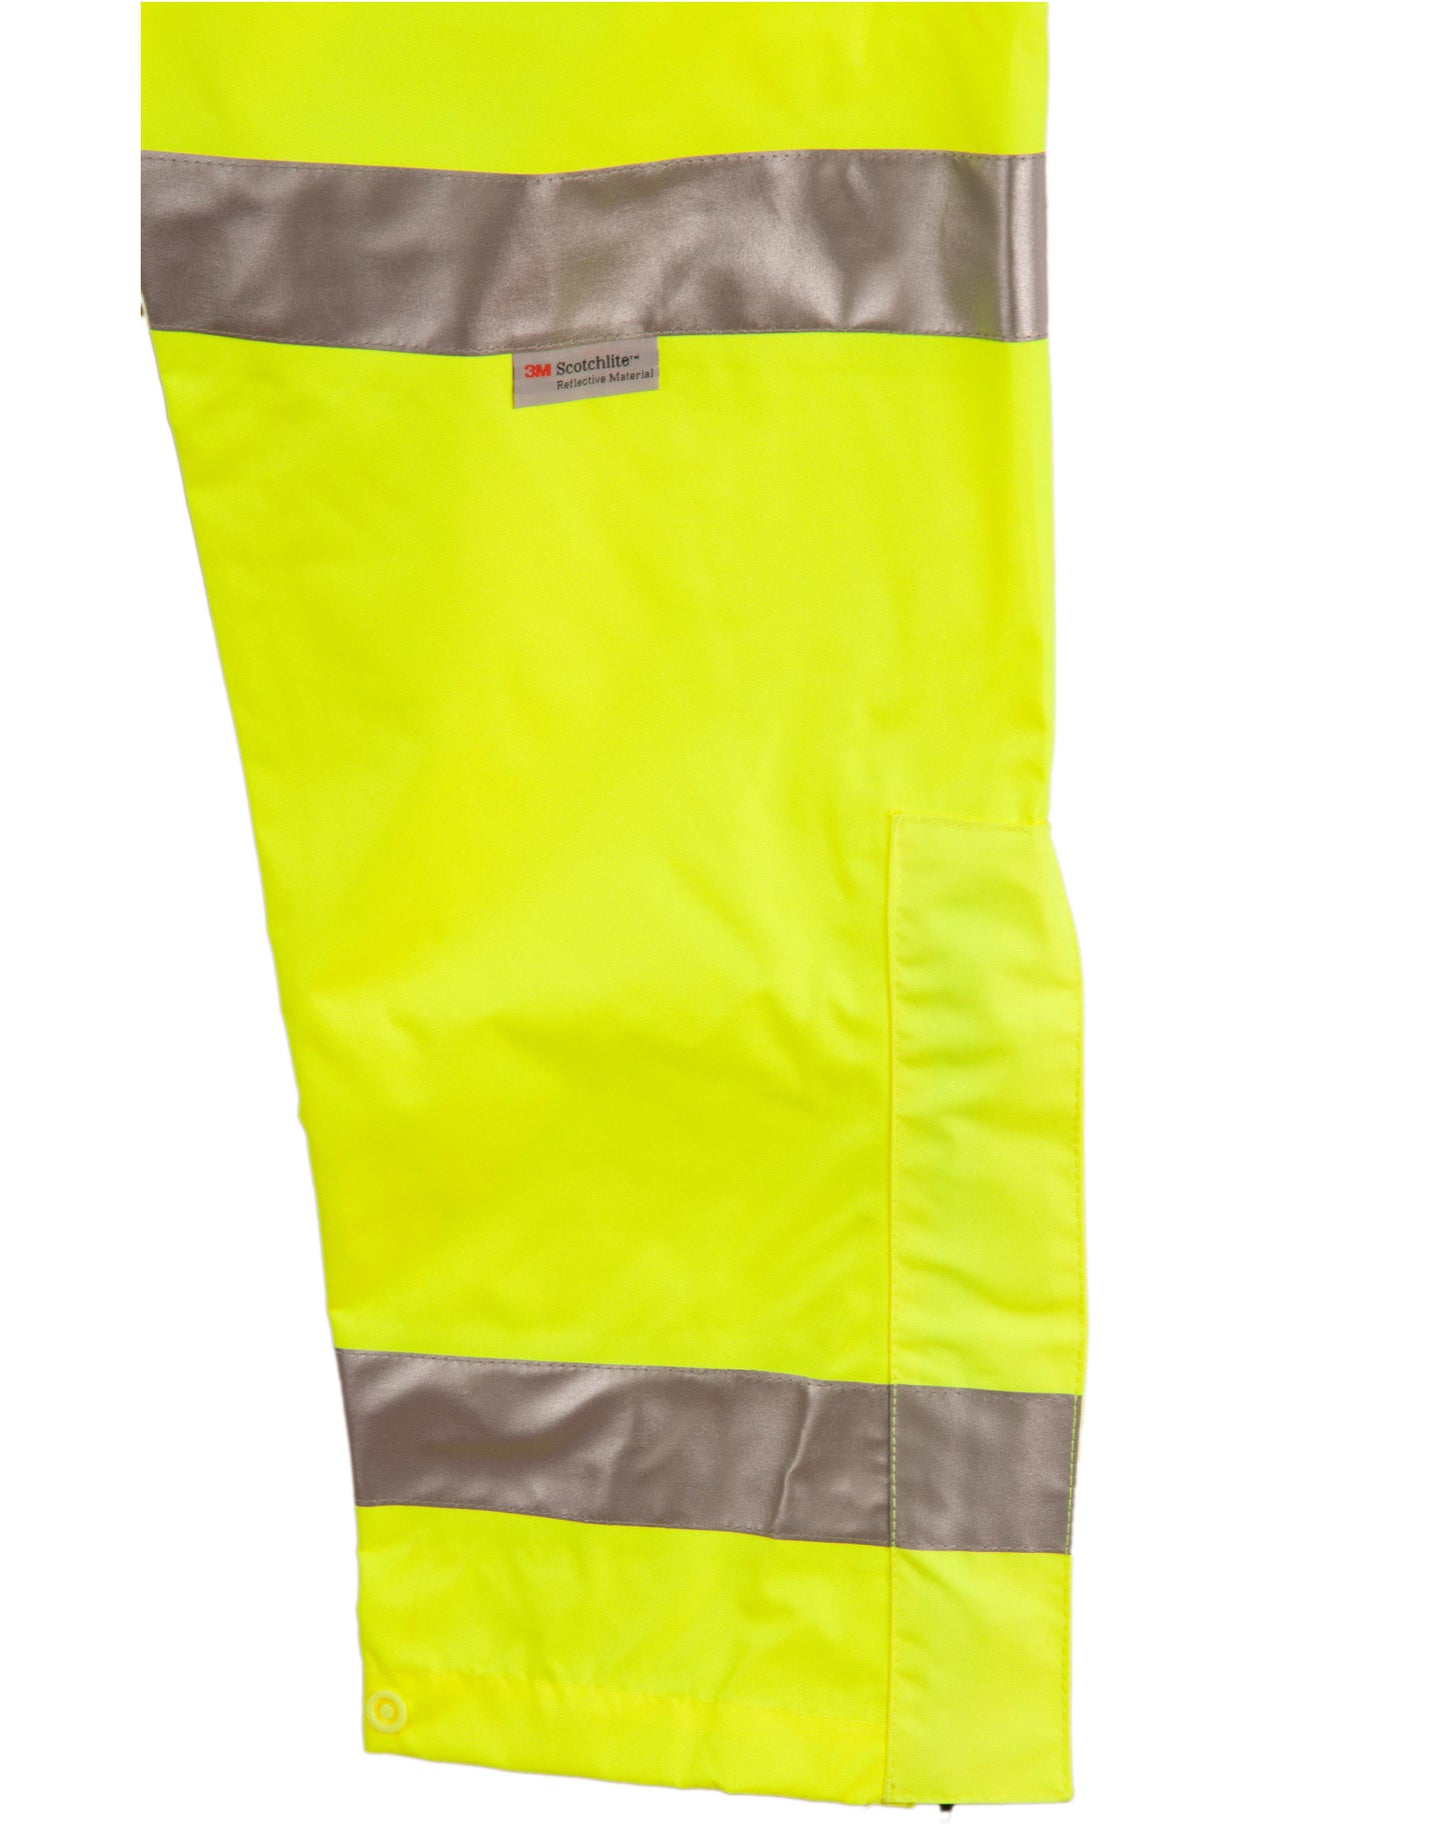 High Vis safety pants by Winning Spirit in fluorescent yellow